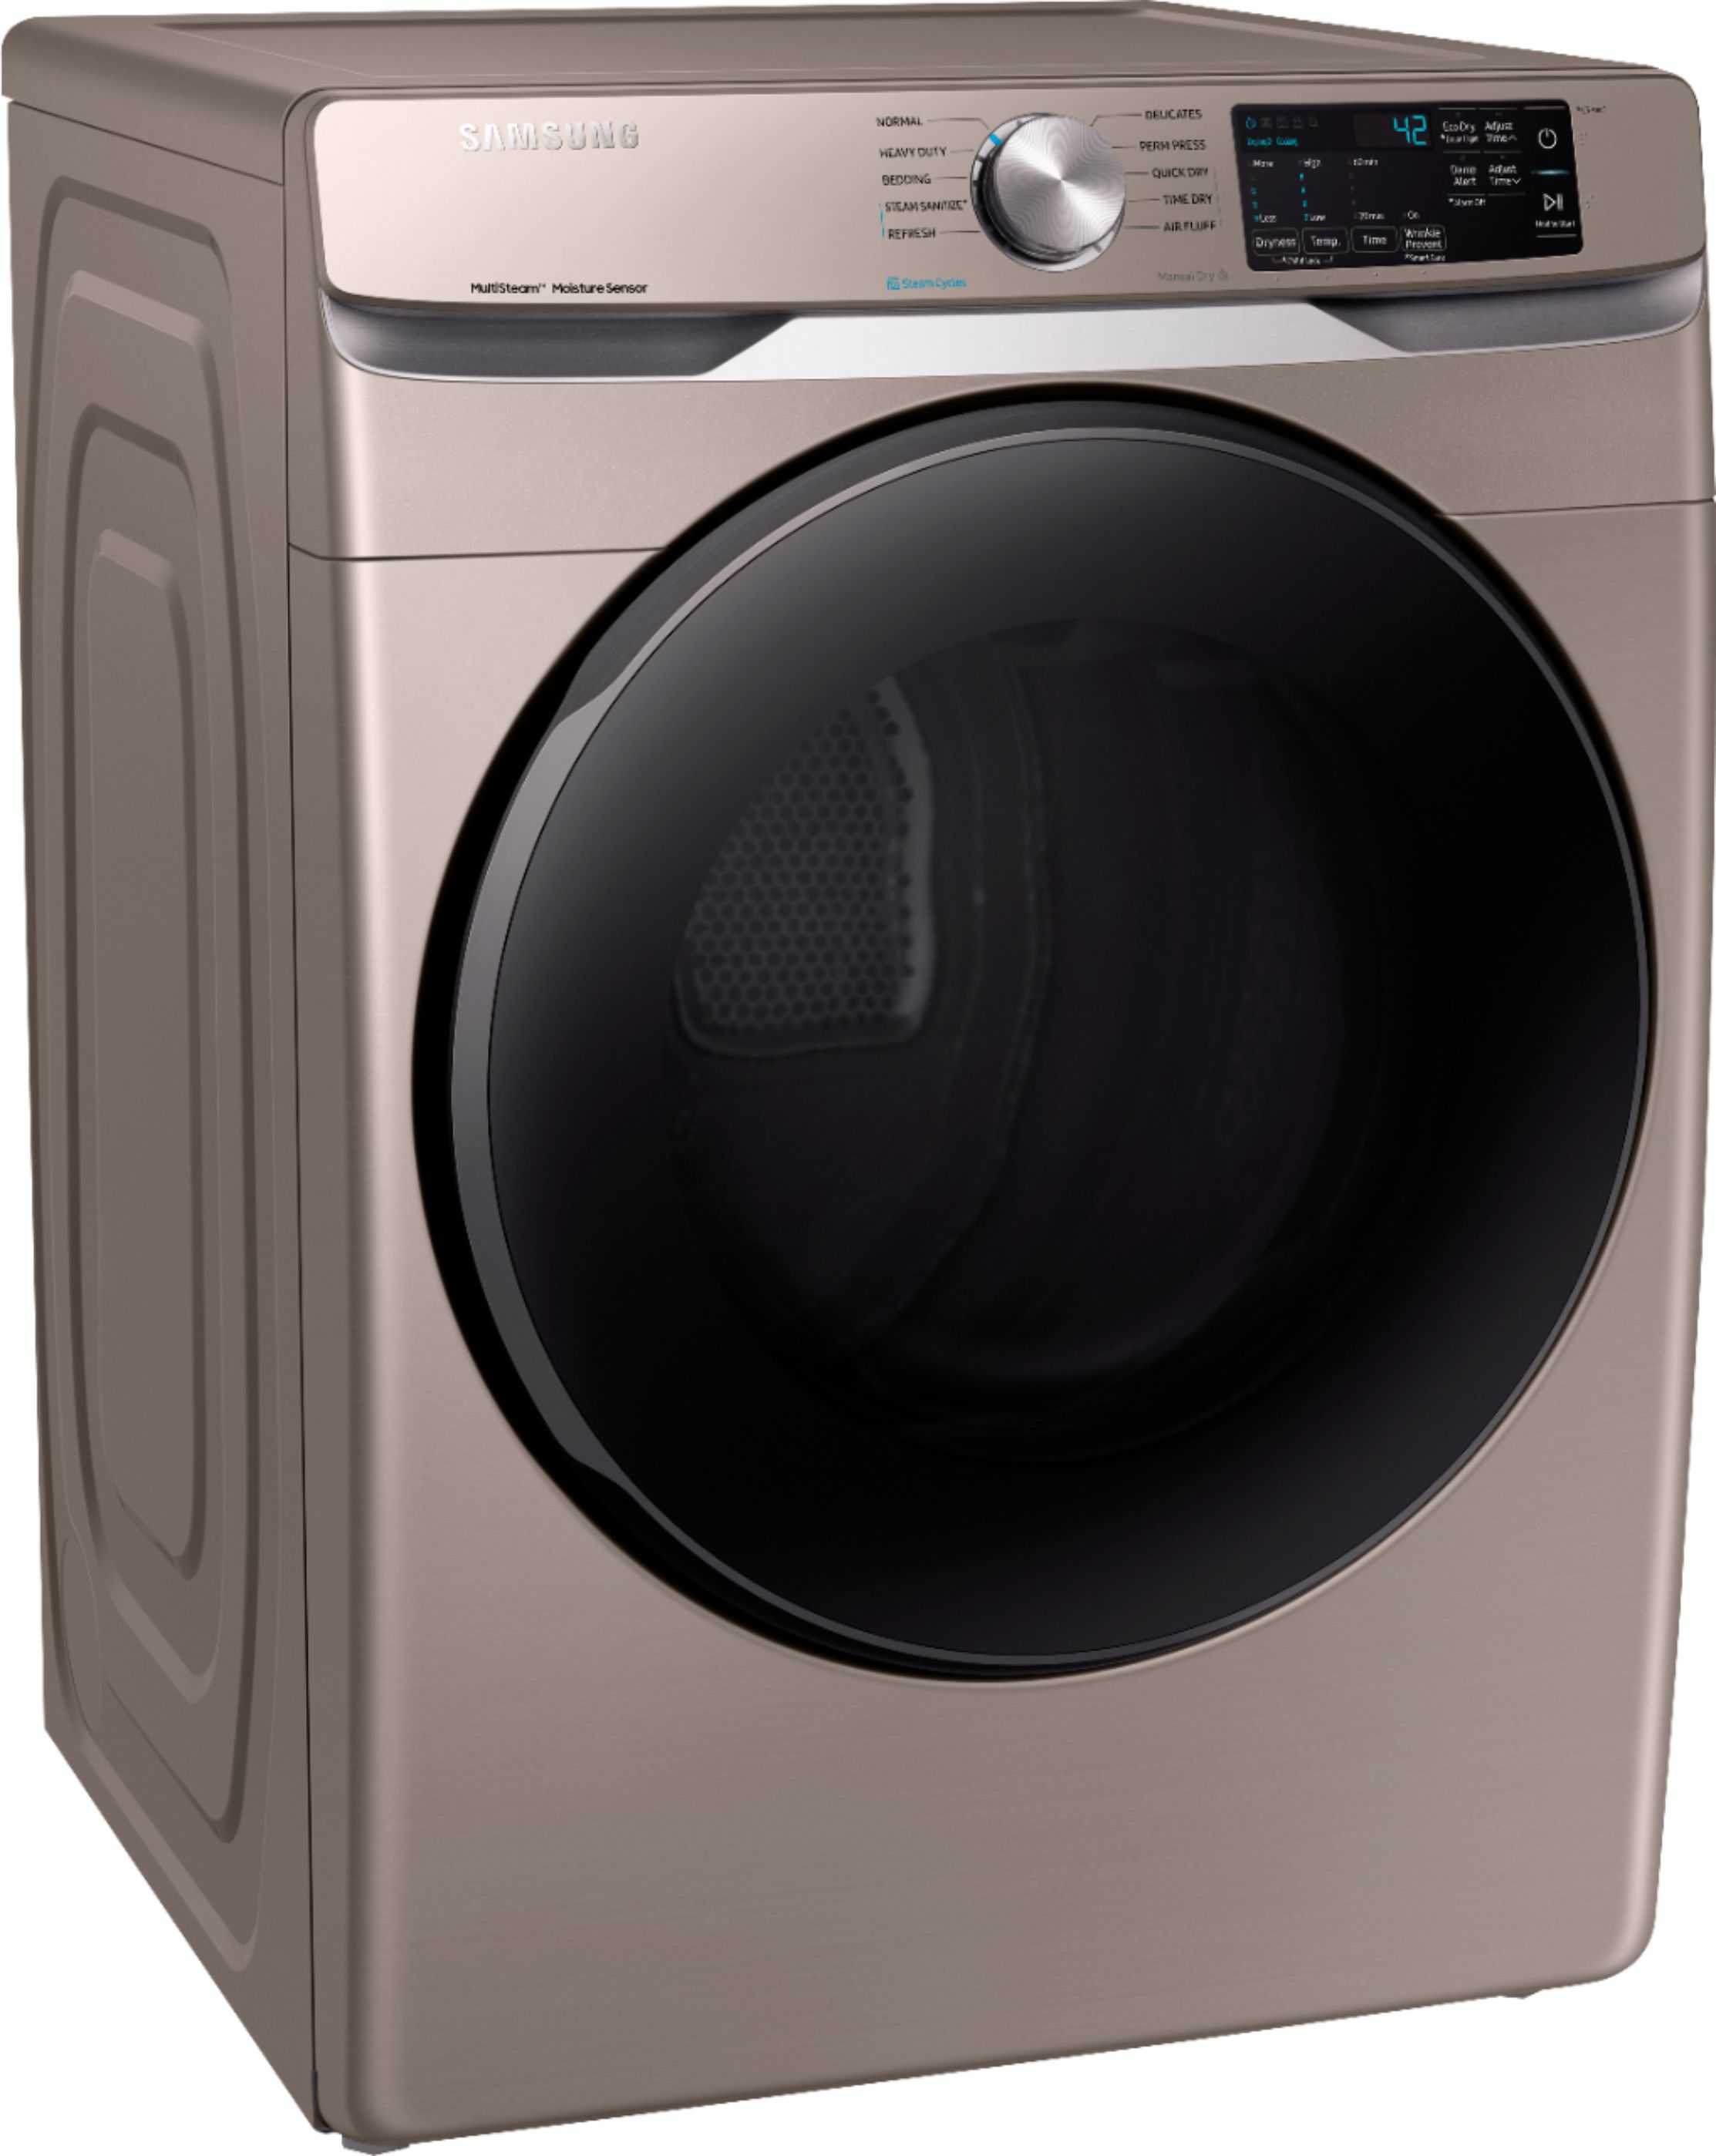 Angle View: Whirlpool - 7.0 Cu. Ft. Electric Dryer with AccuDry™ Sensor Drying System - White